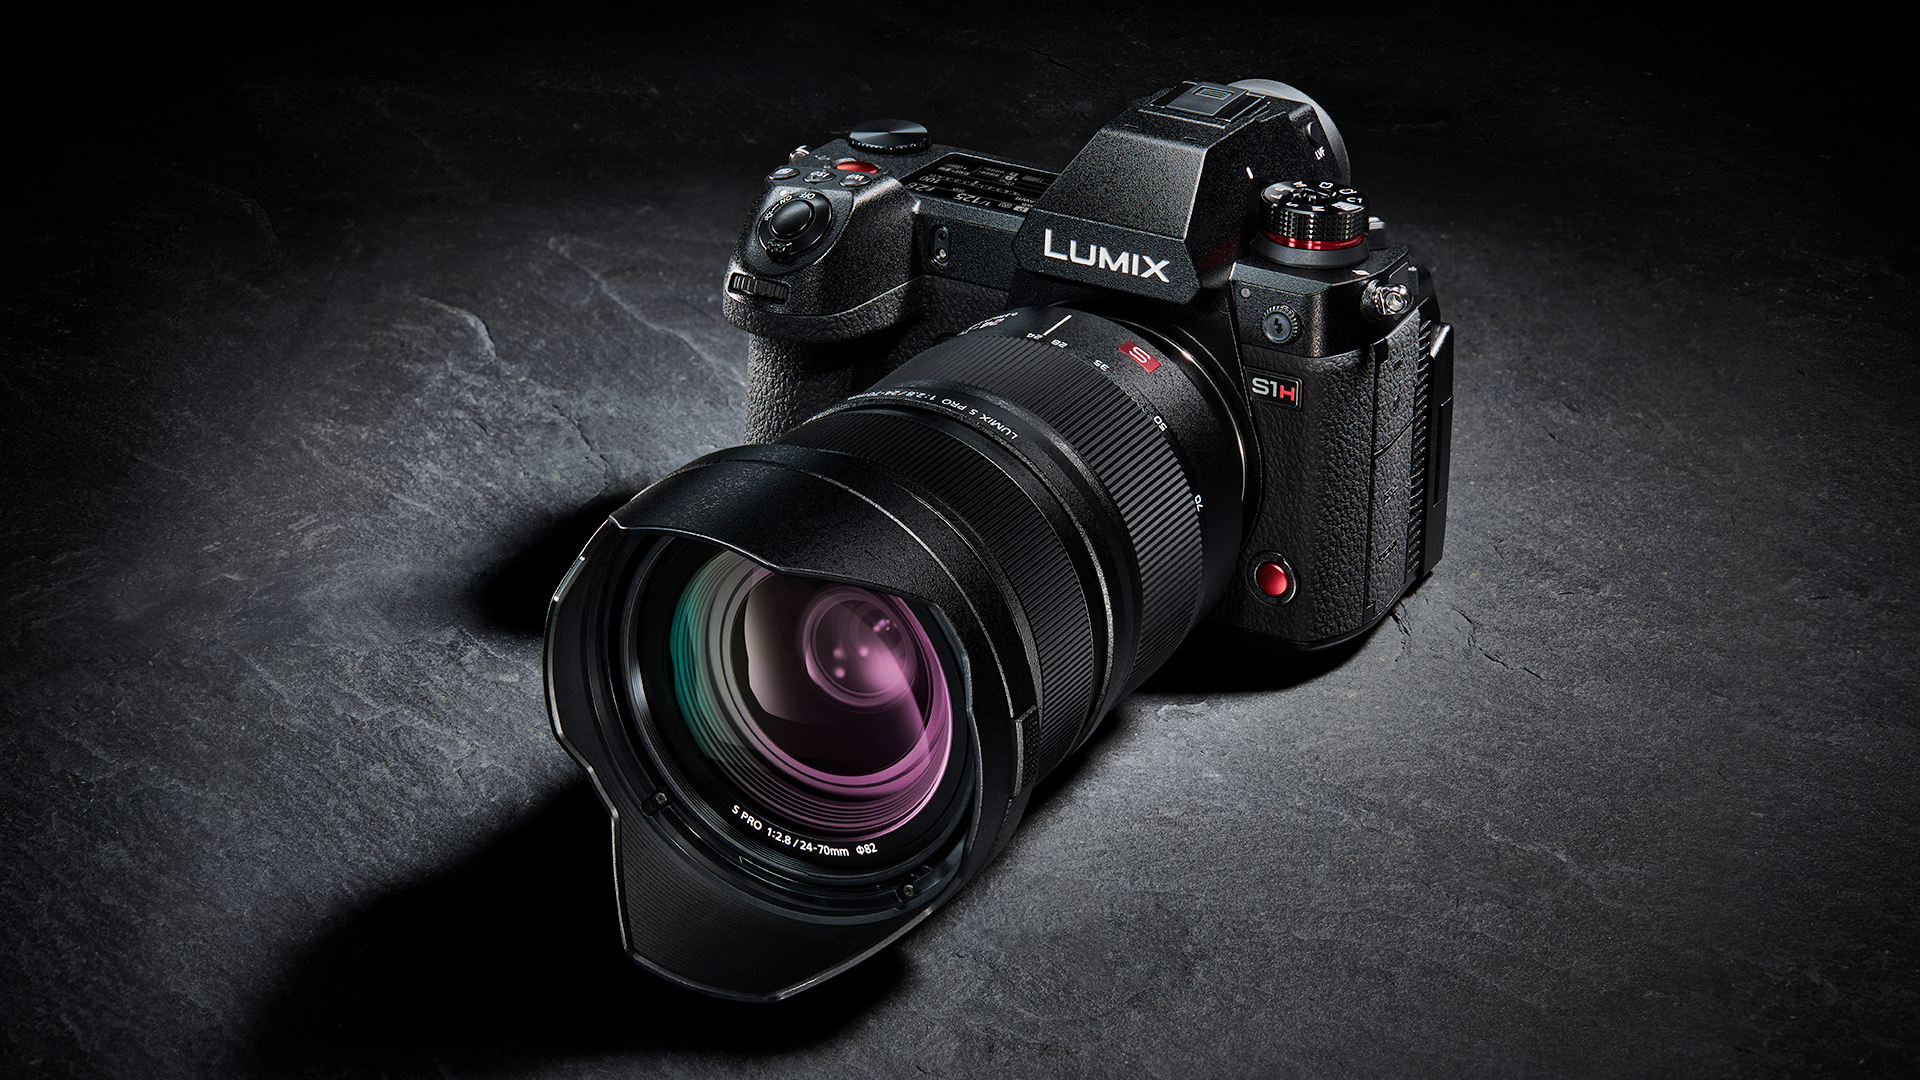 Artiest Migratie geur Here's our exclusive first hands-on with the 6K Panasonic Lumix S1H